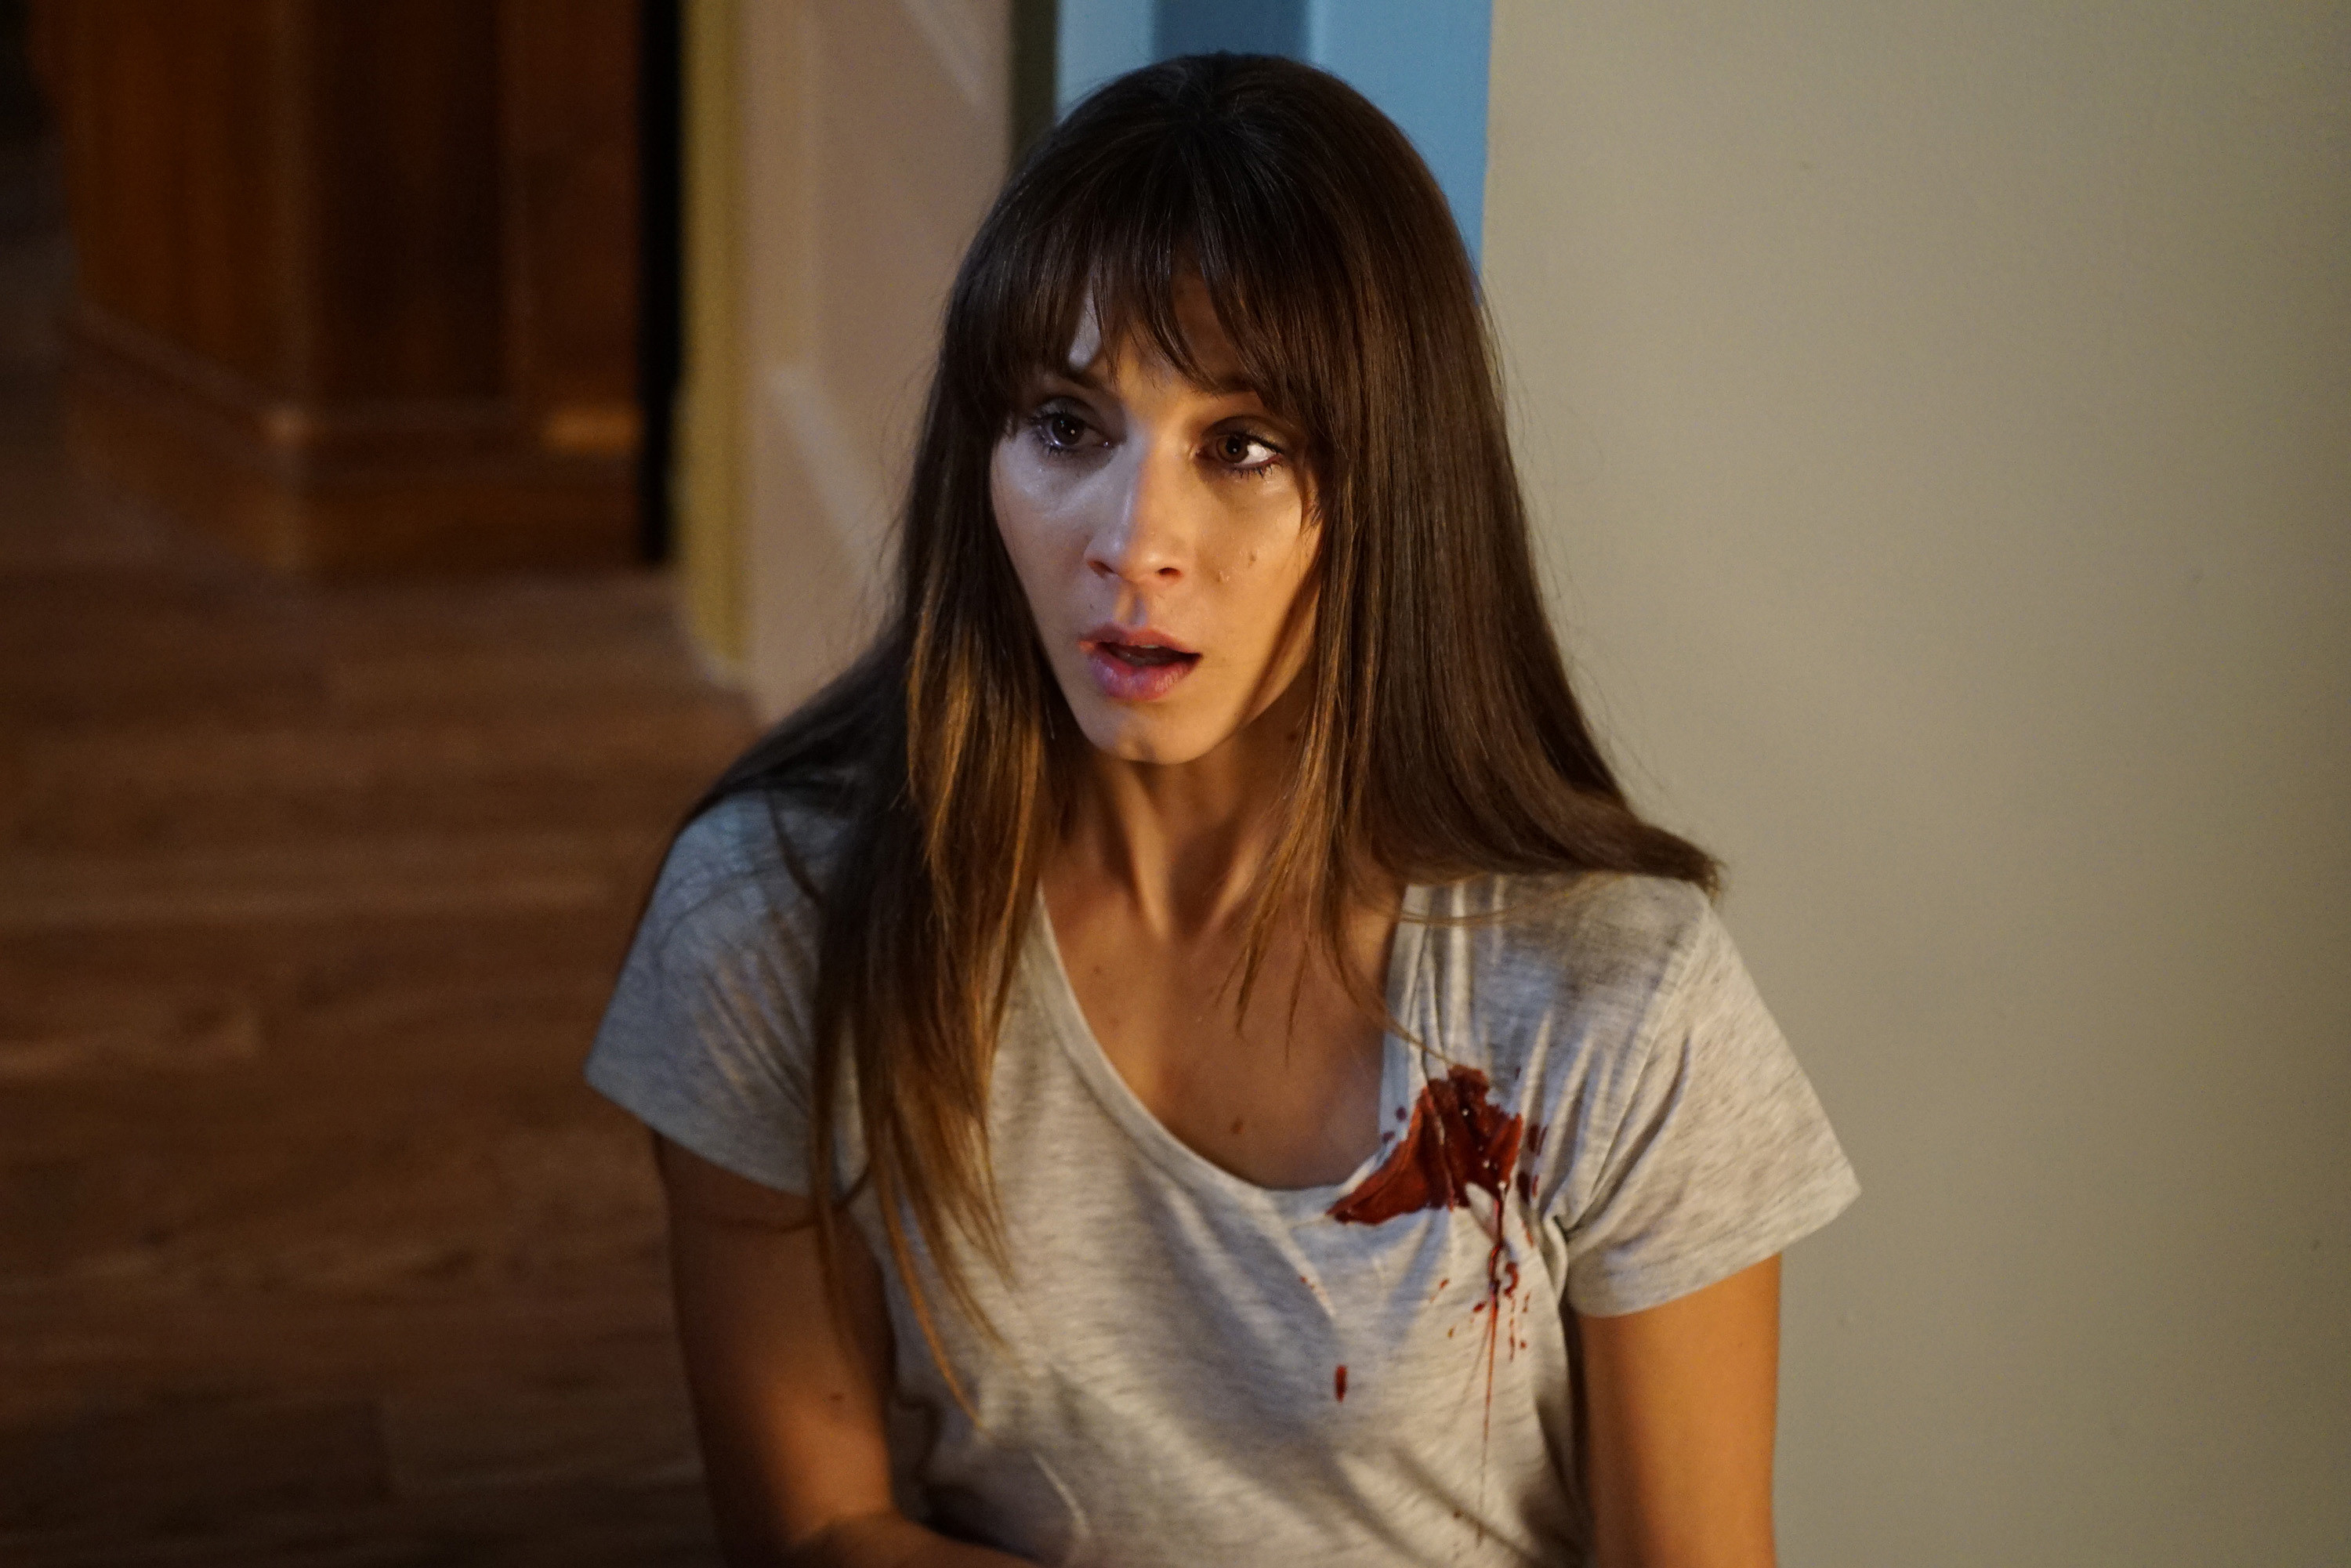 Spencer in &quot;Pretty Little Liars&quot; wearing bloody shirt and looking shocked